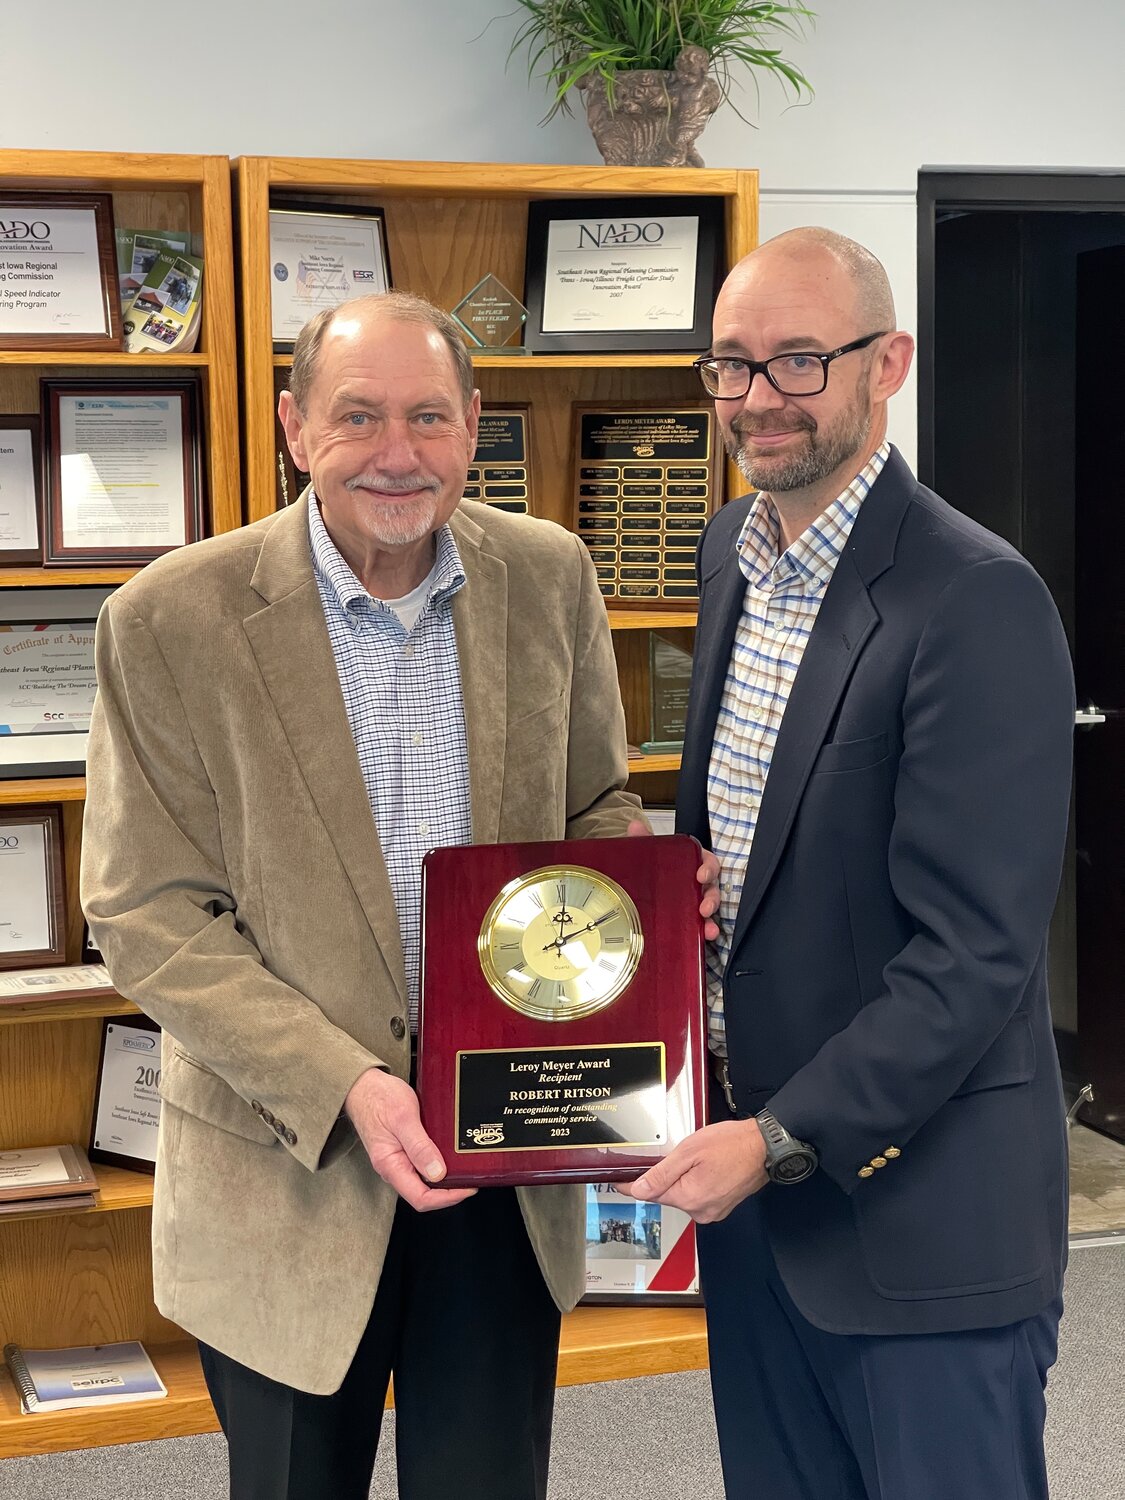 Burlington's Robert Ritson accepts the LeRoy Meyer Award from SEIRPC's Mike Norris this week following the groups' January board meeting.